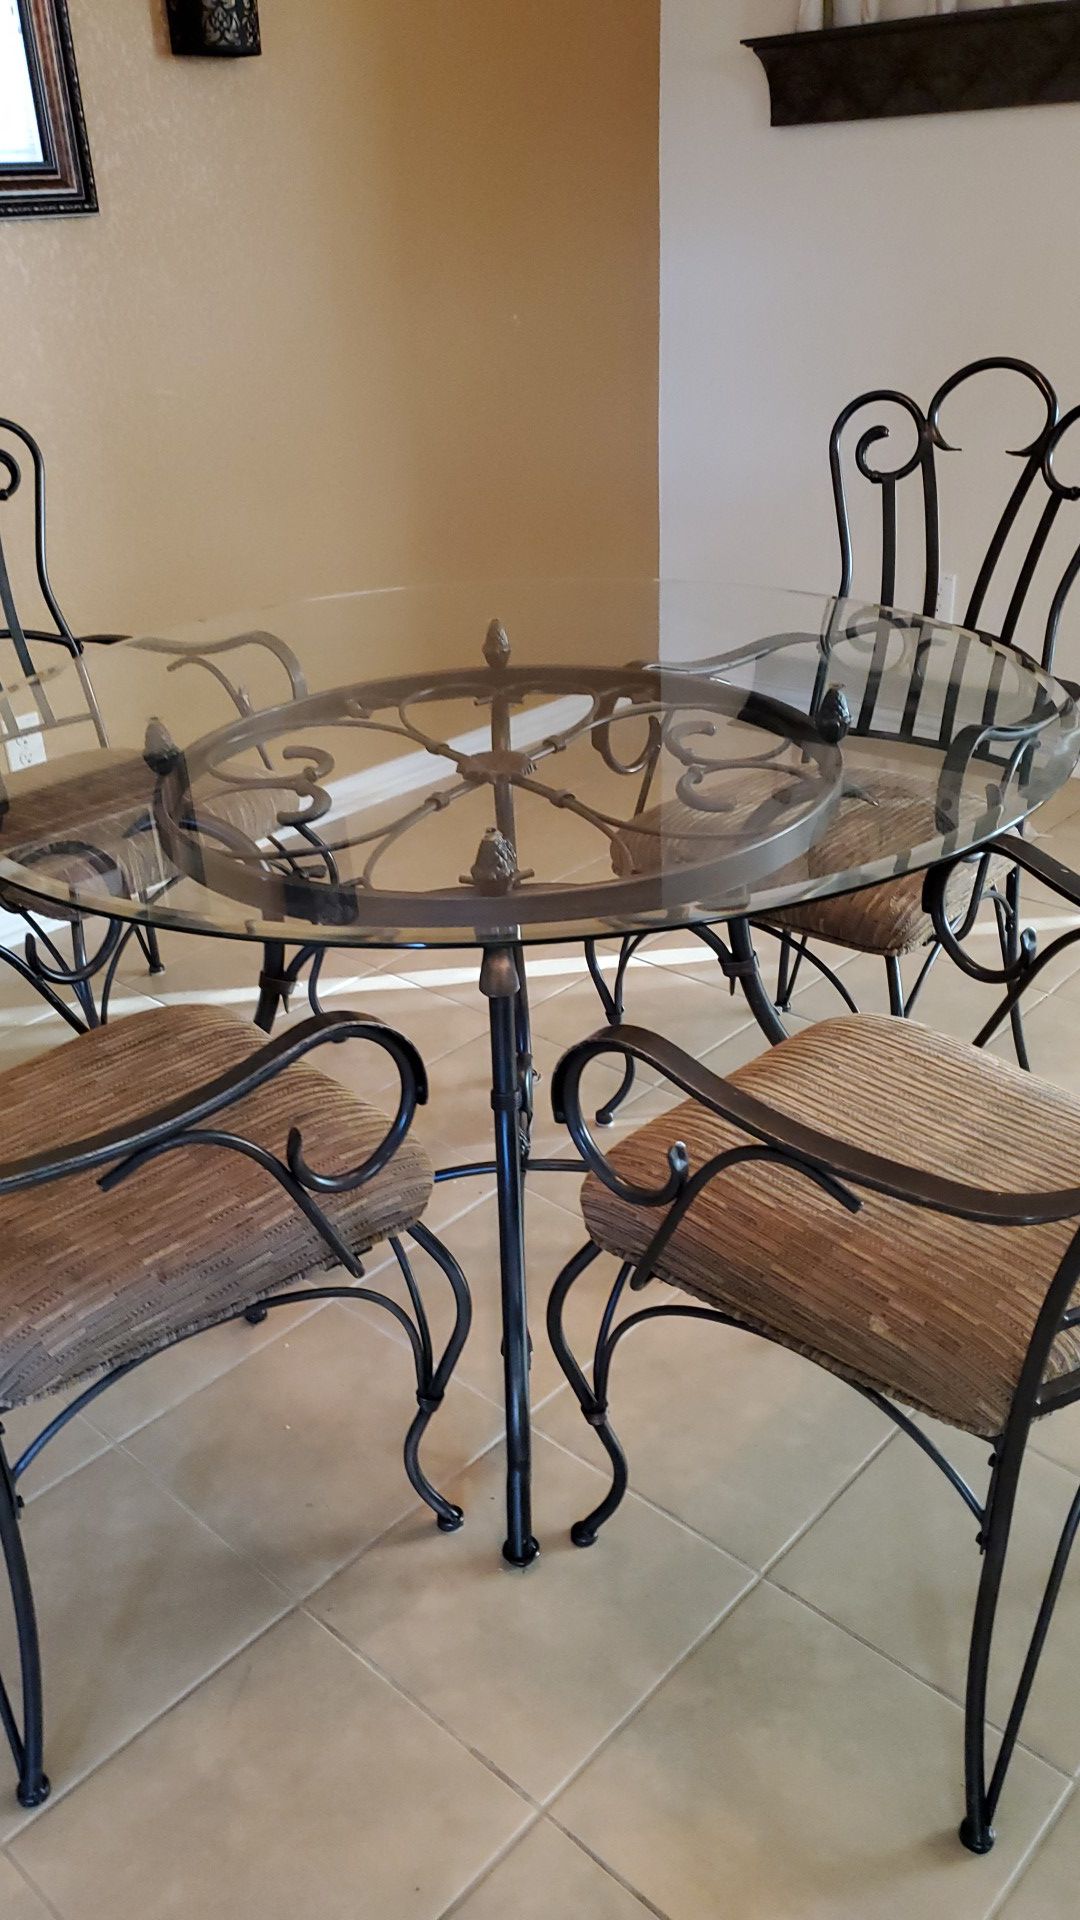 4ft Round Glass Dinning Table